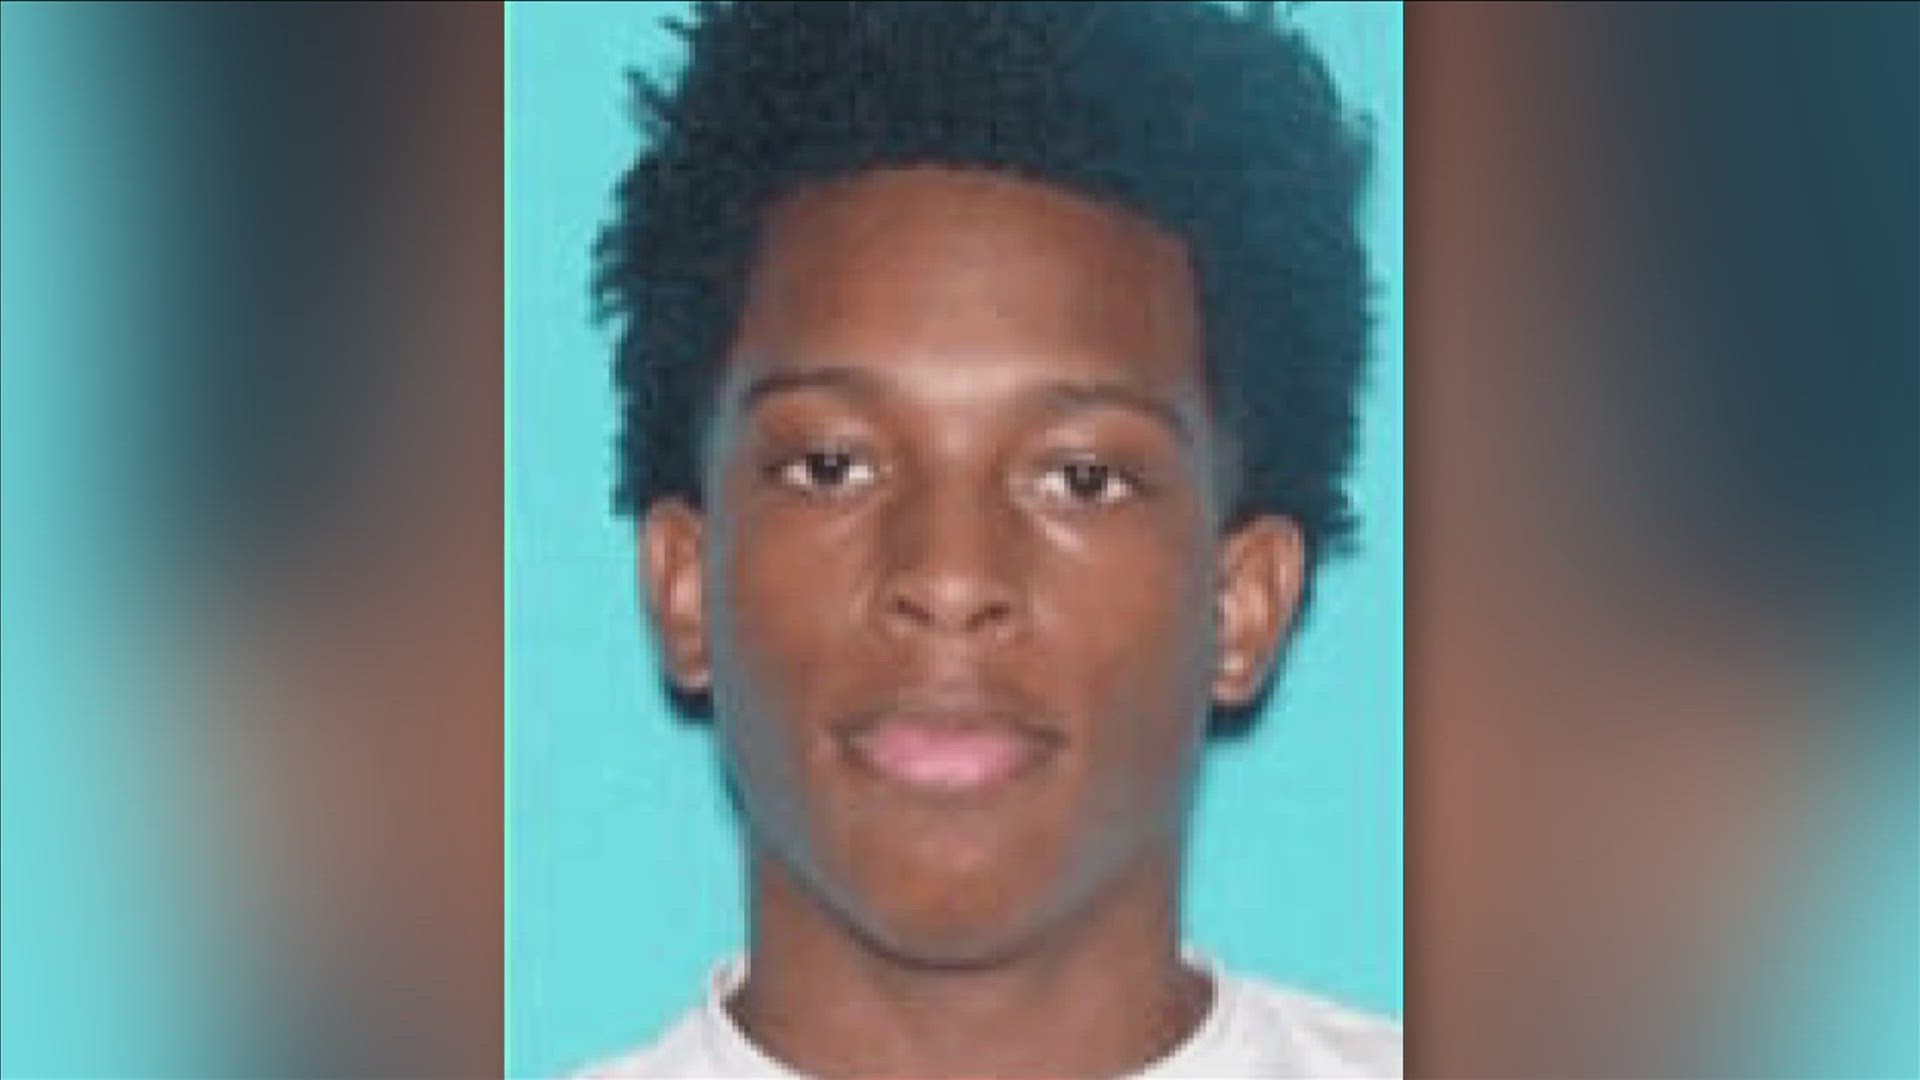 On Friday, MPD investigators identified the suspected shooter as Xavier Lee, 23.